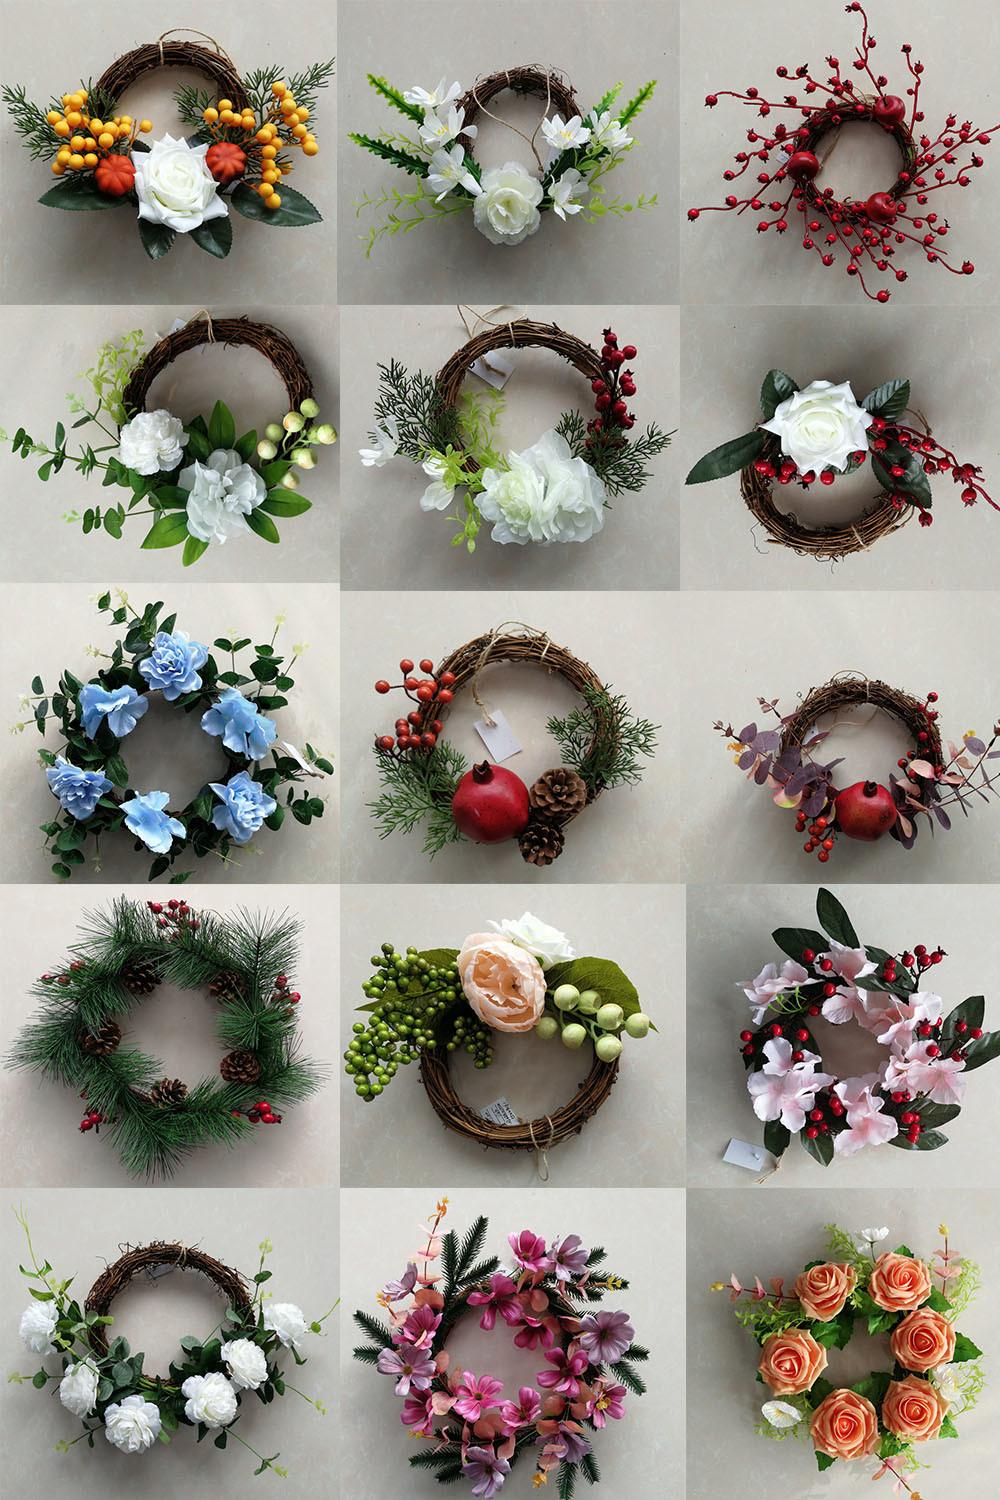 Wholesale 24inch Wreath with Red Berry and Pinecone Wreath Christmas Decoration